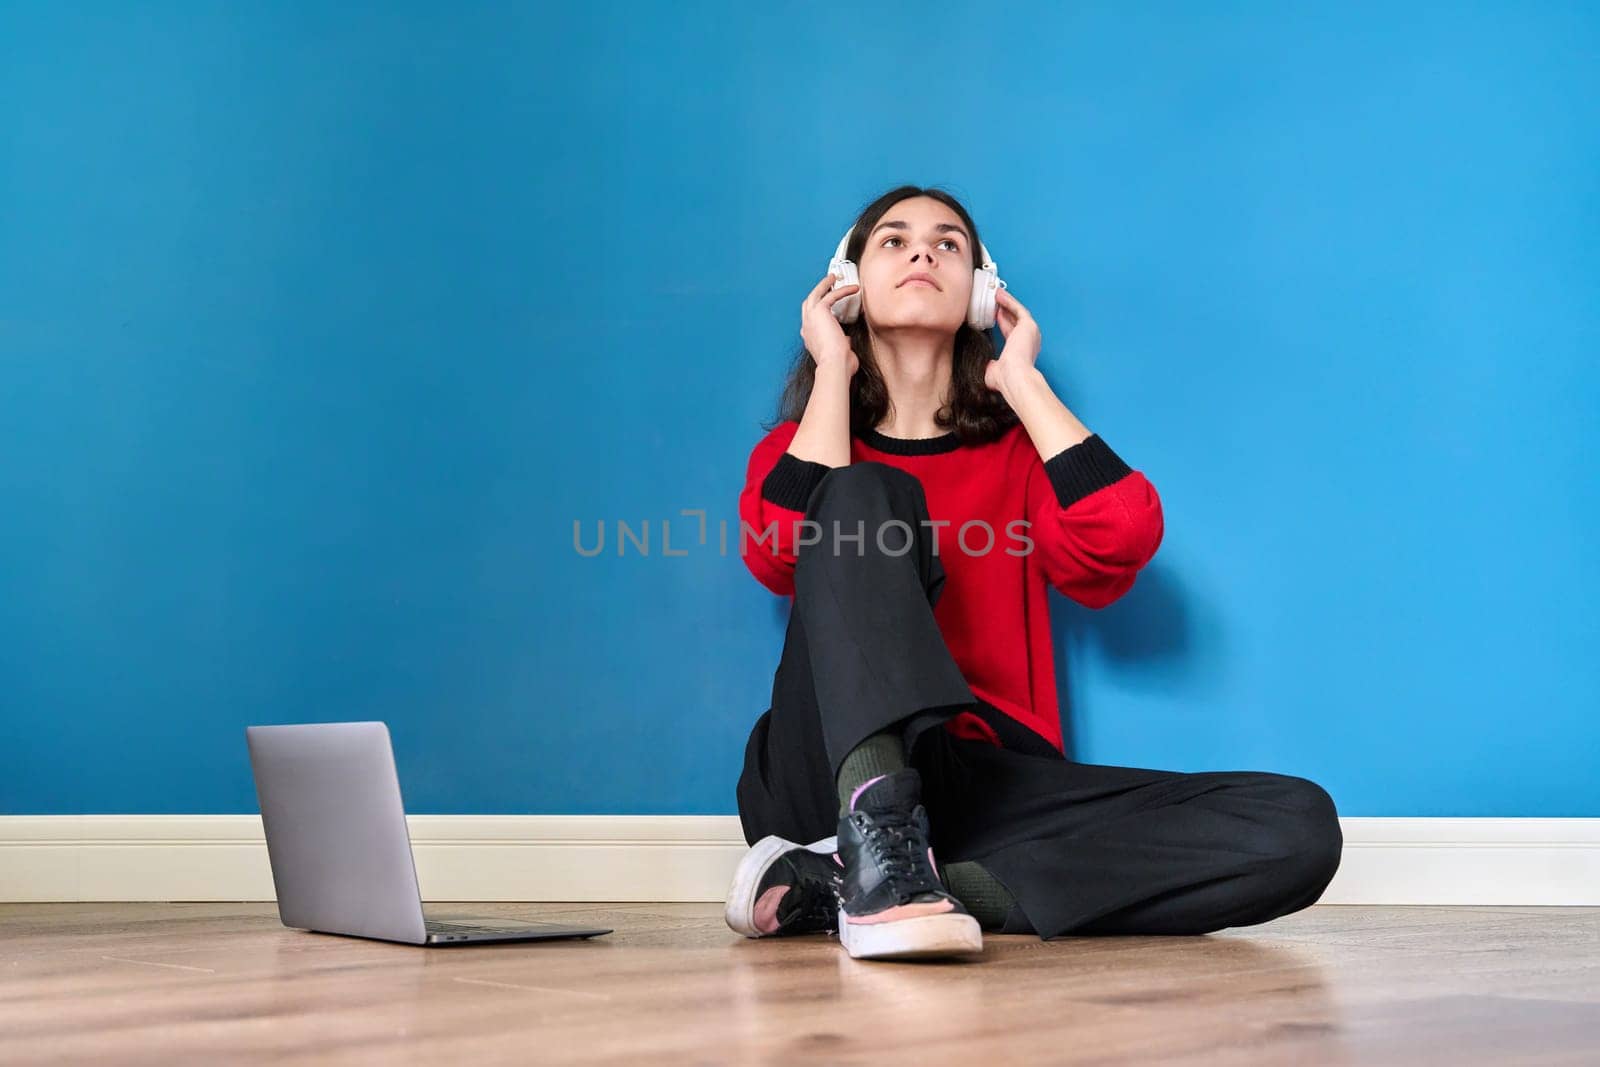 Young teenage guy student in headphones with laptop sitting on the floor on blue background. Lifestyle, youth, technology, leisure, music, education, young people concept